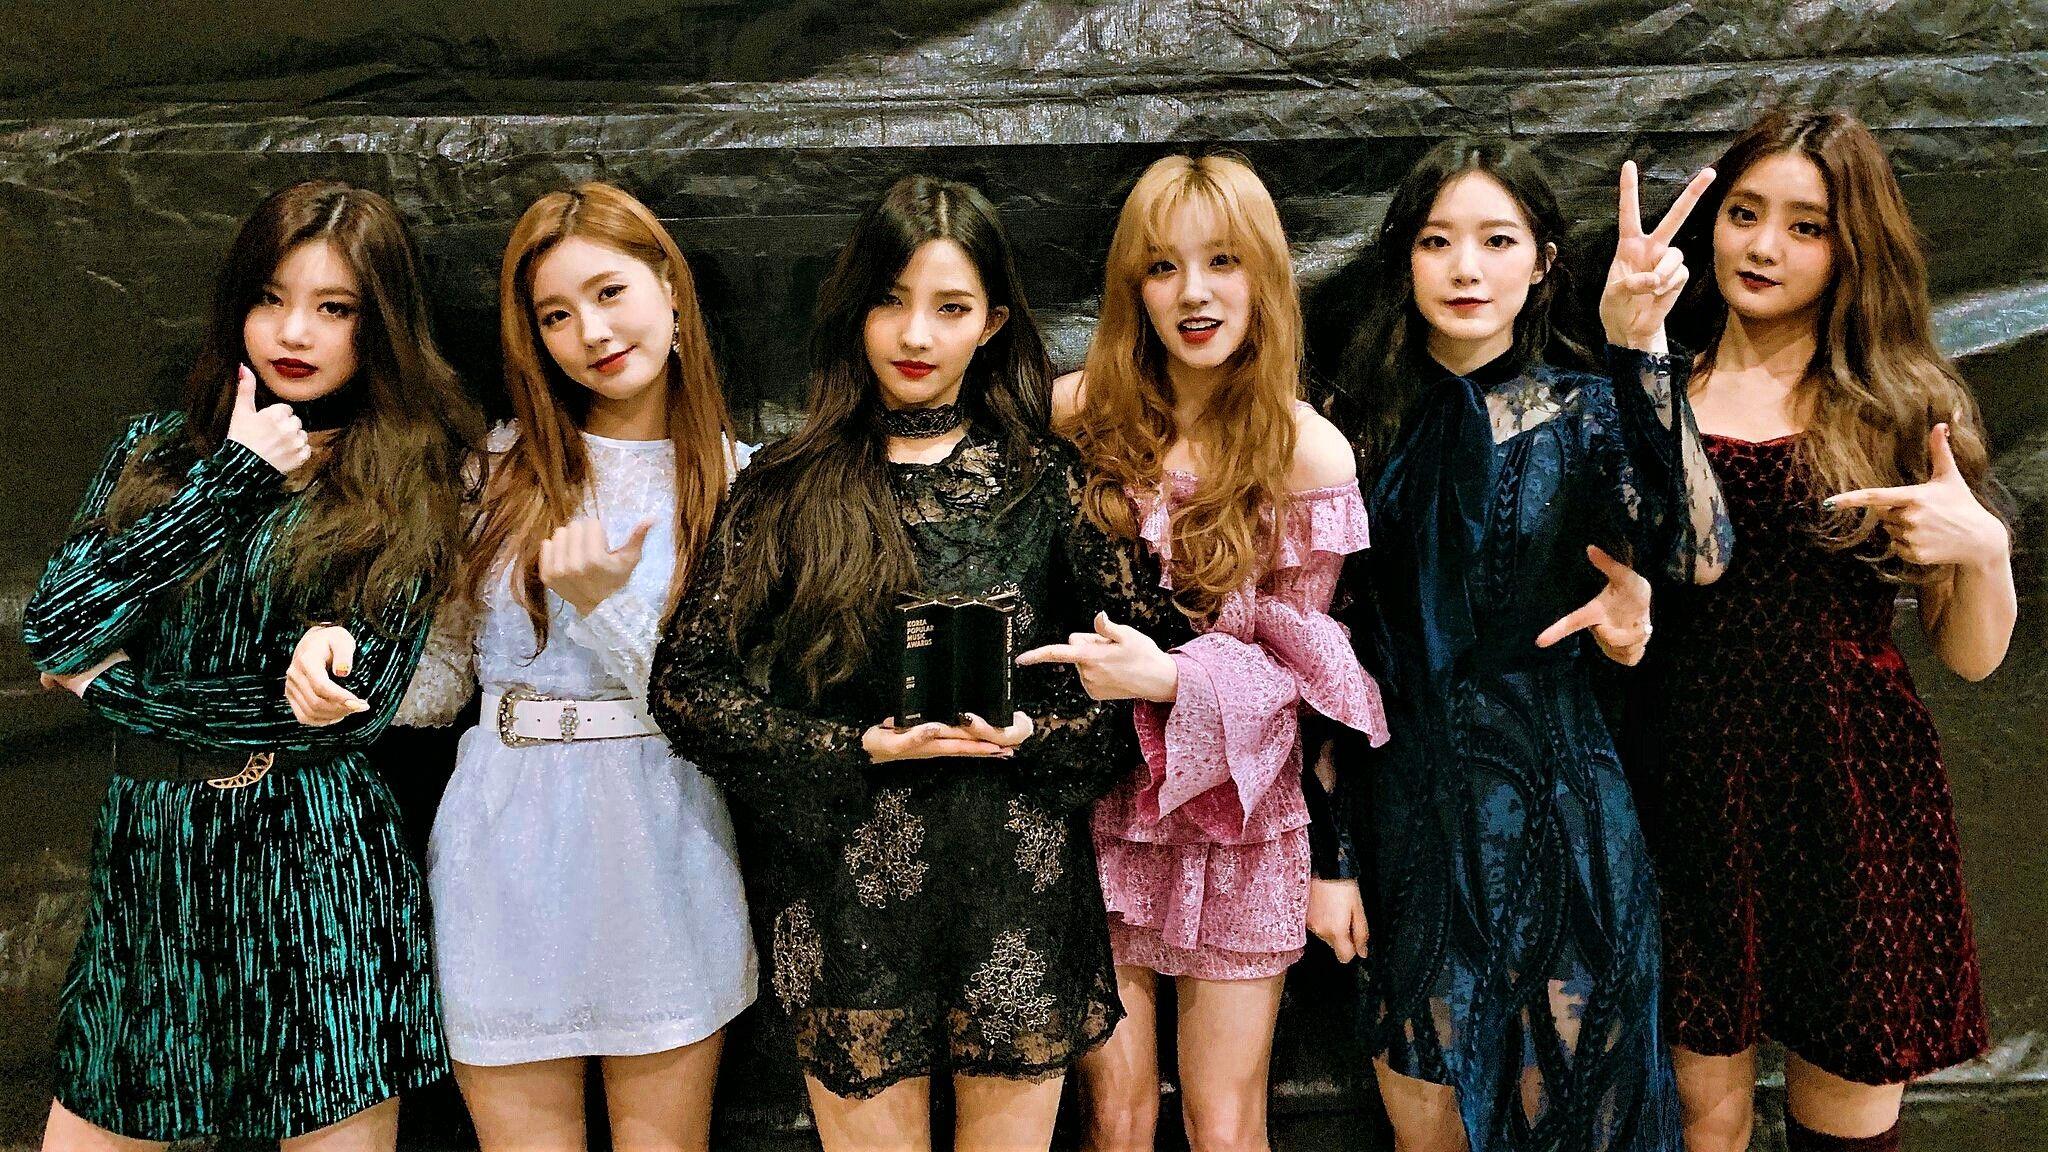 G I Dle Wallpapers Top Free G I Dle Backgrounds Wallpaperaccess